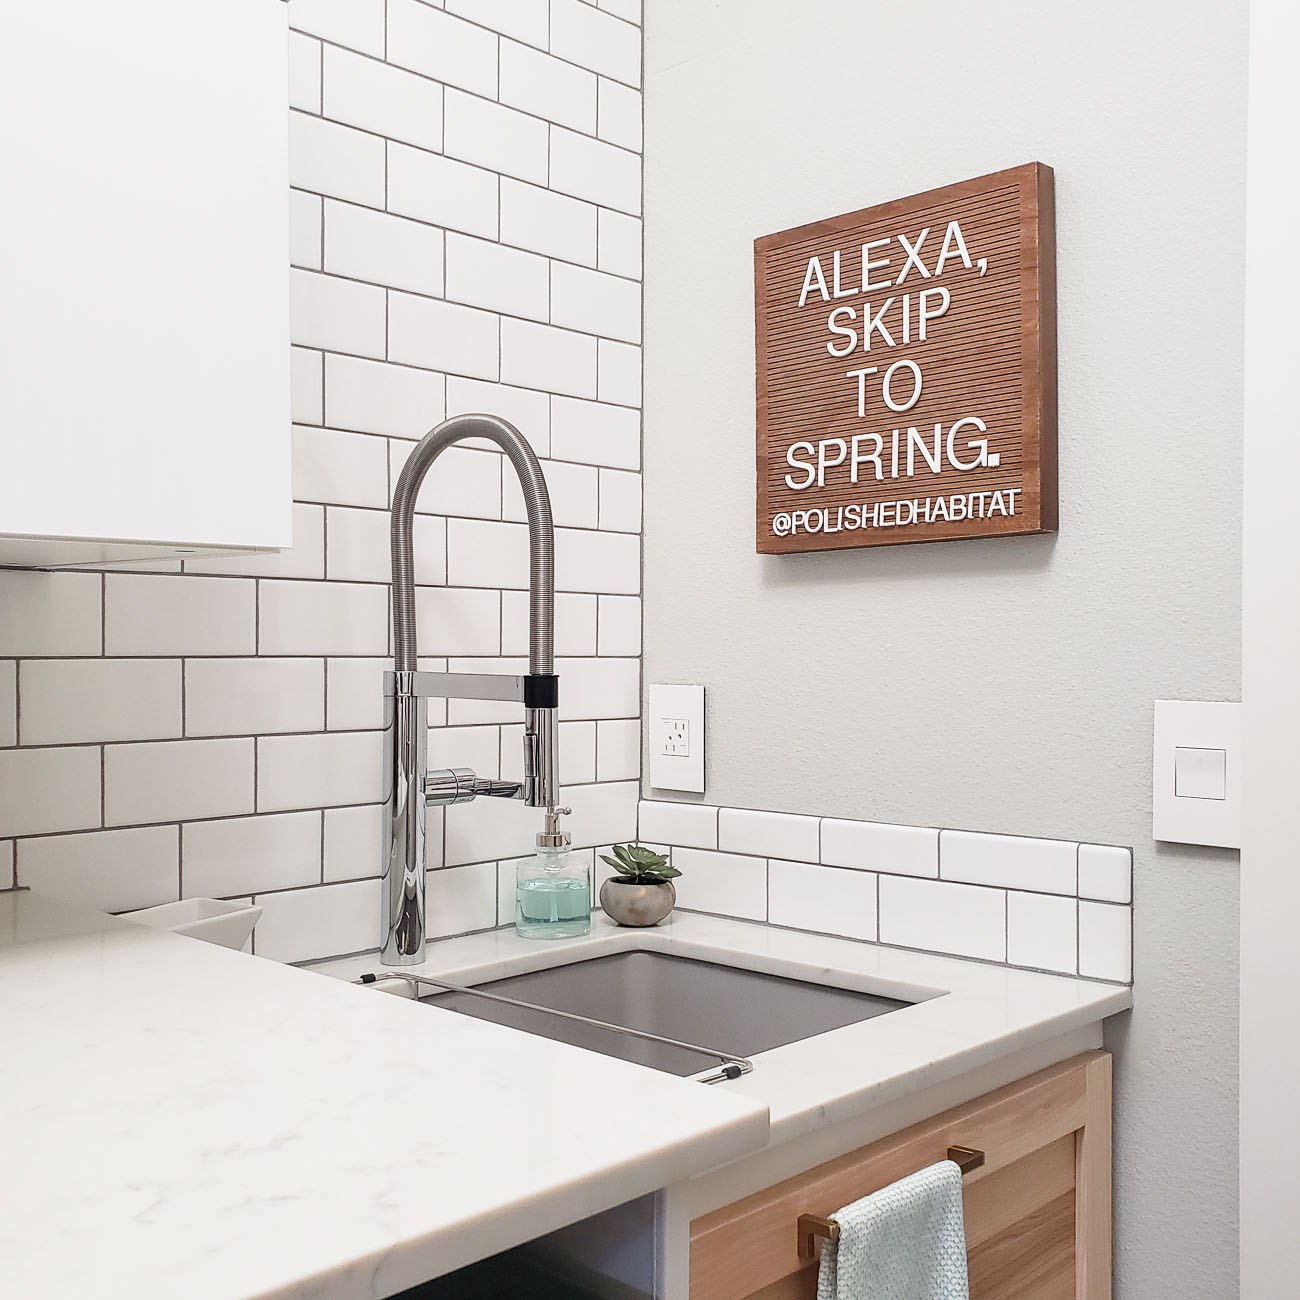 Laundry room with wood letter board - Alexa Skip to Spring